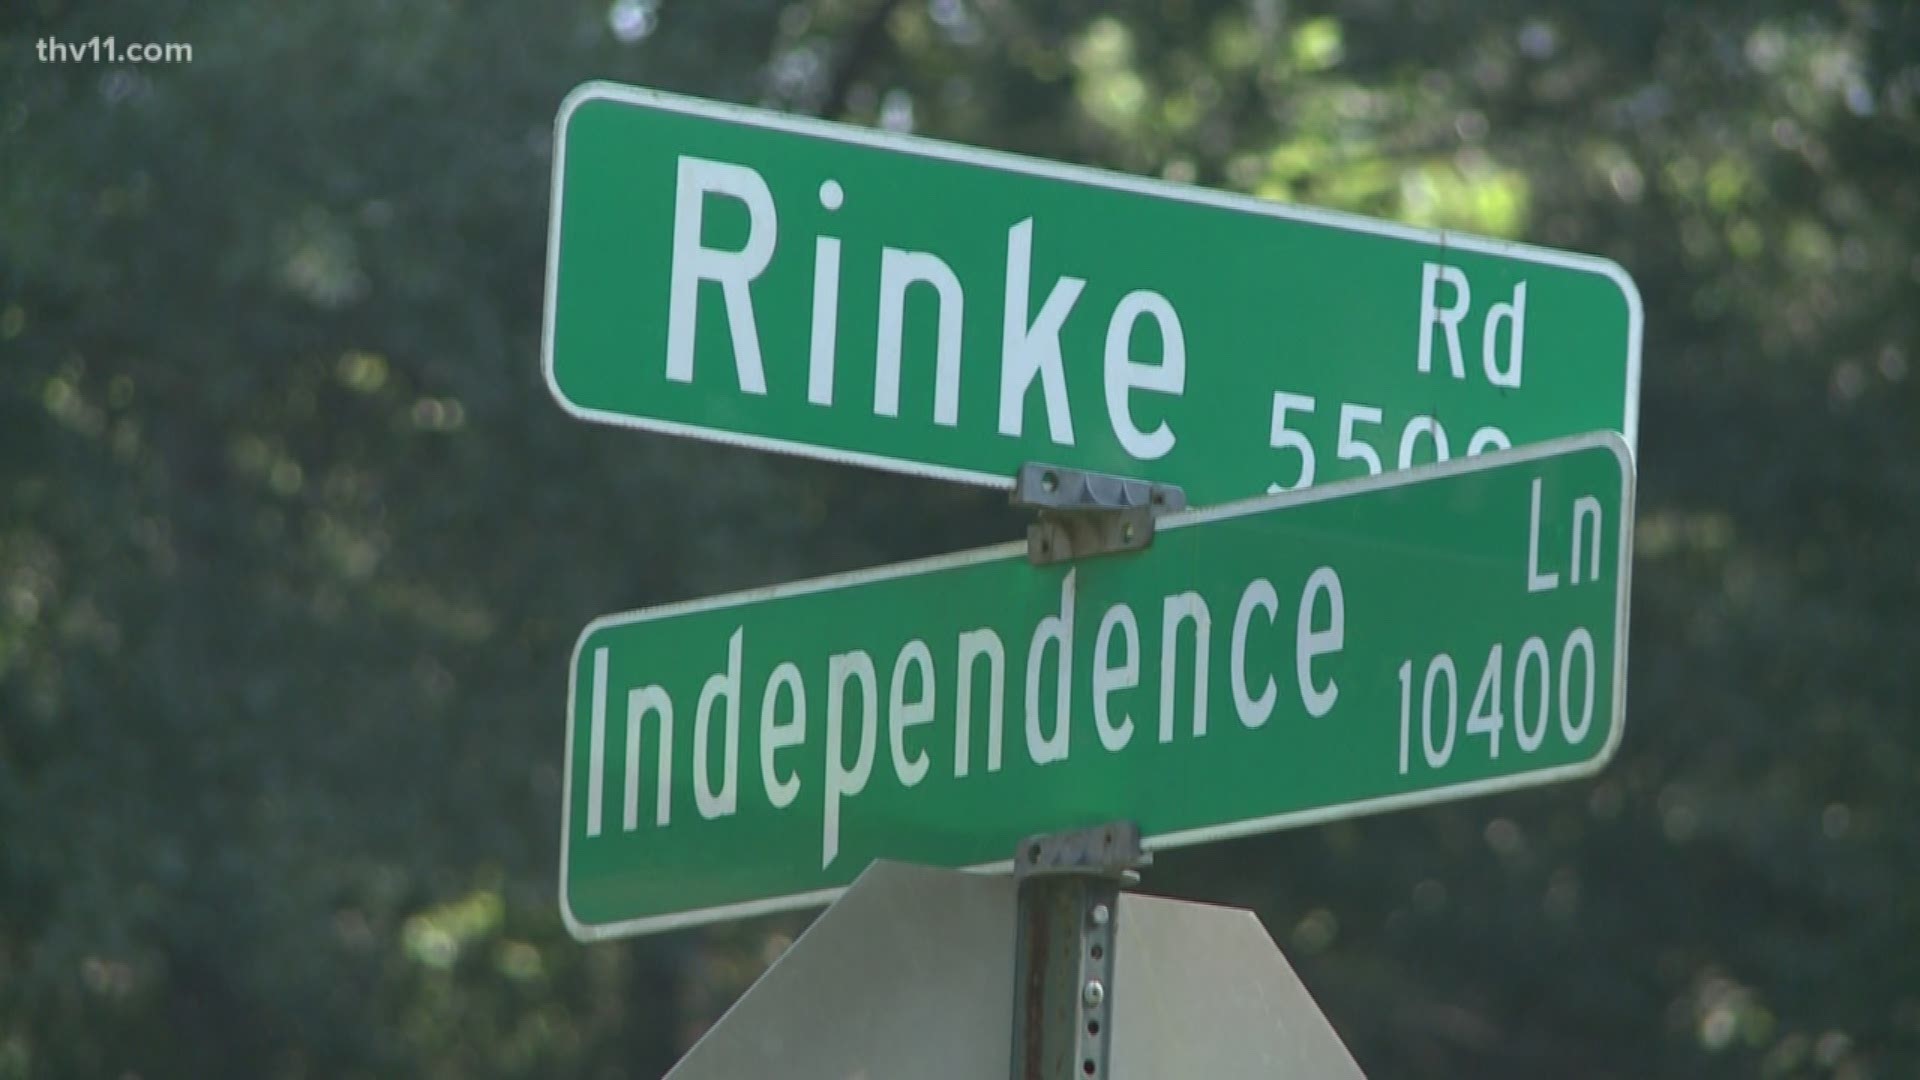 Little Rock Police Department found the body near the intersection of Rinke Road and Independence Lane.